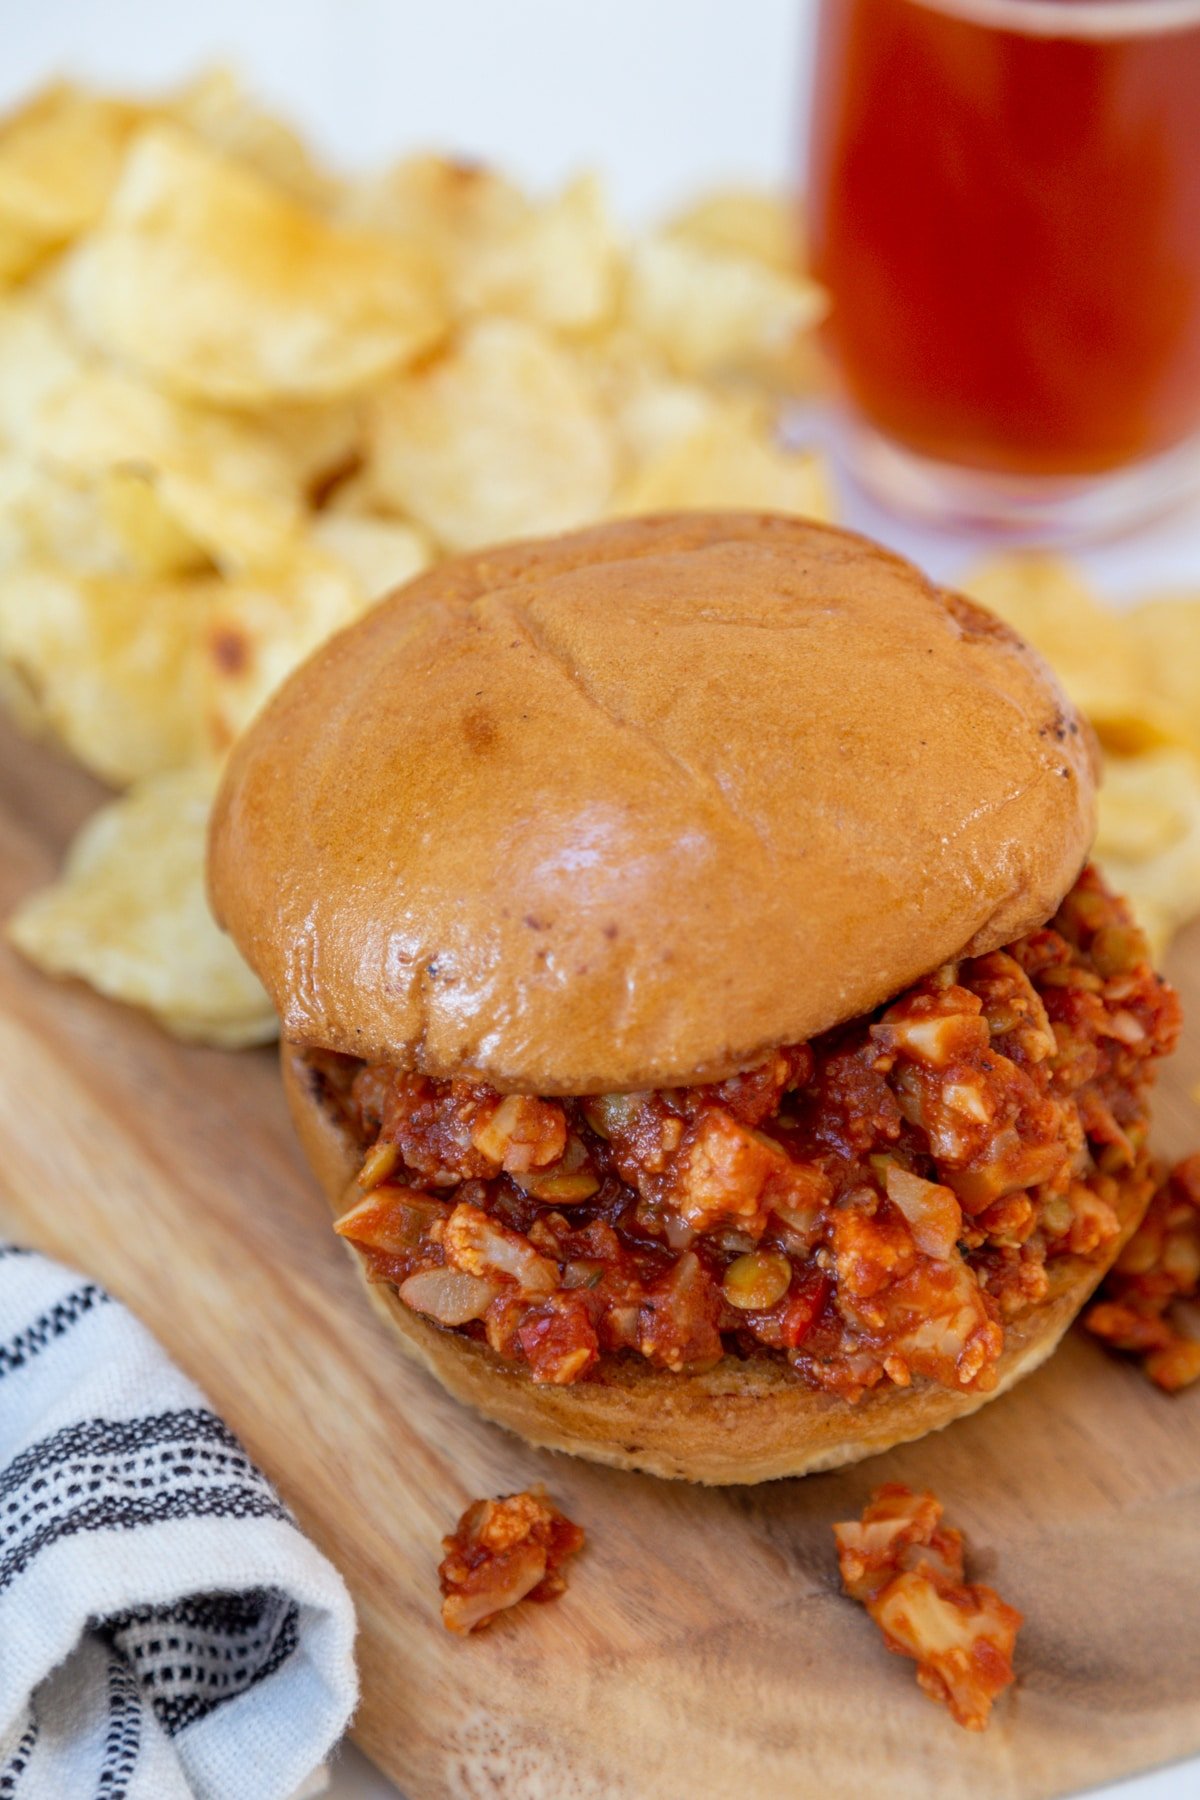 A sloppy Joe sandwich on a wooden board with potato chips and a glass of beer in the background.